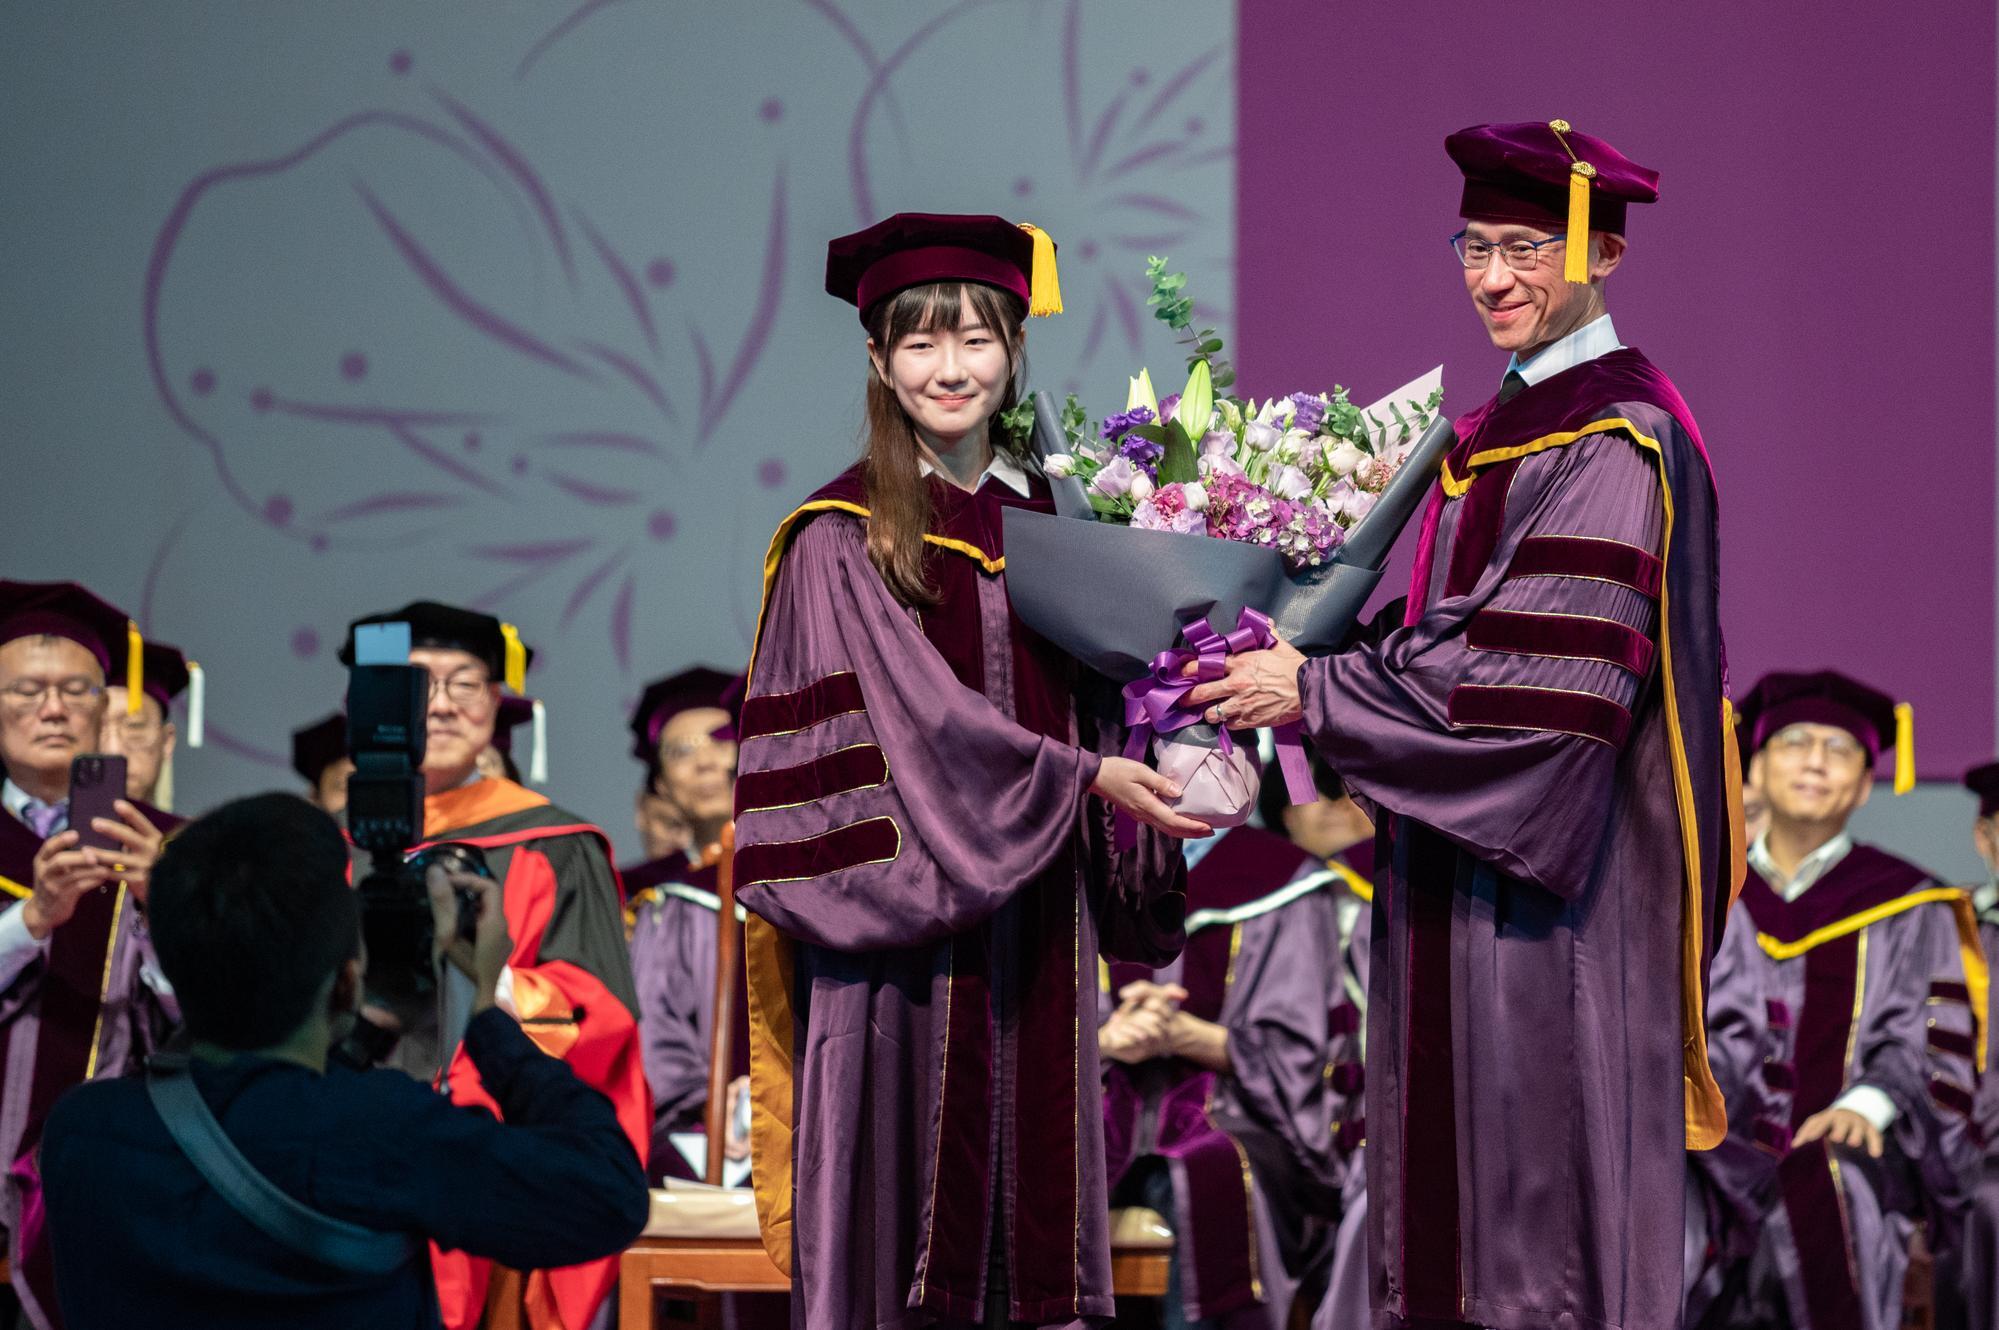 Chi-hsien Wang (王祺嫻) (left), a Ph.D. student from the Department of Chemical Engineering, presents a bouquet of flowers to President W. John Kao (高為元) on behalf of the graduating students.